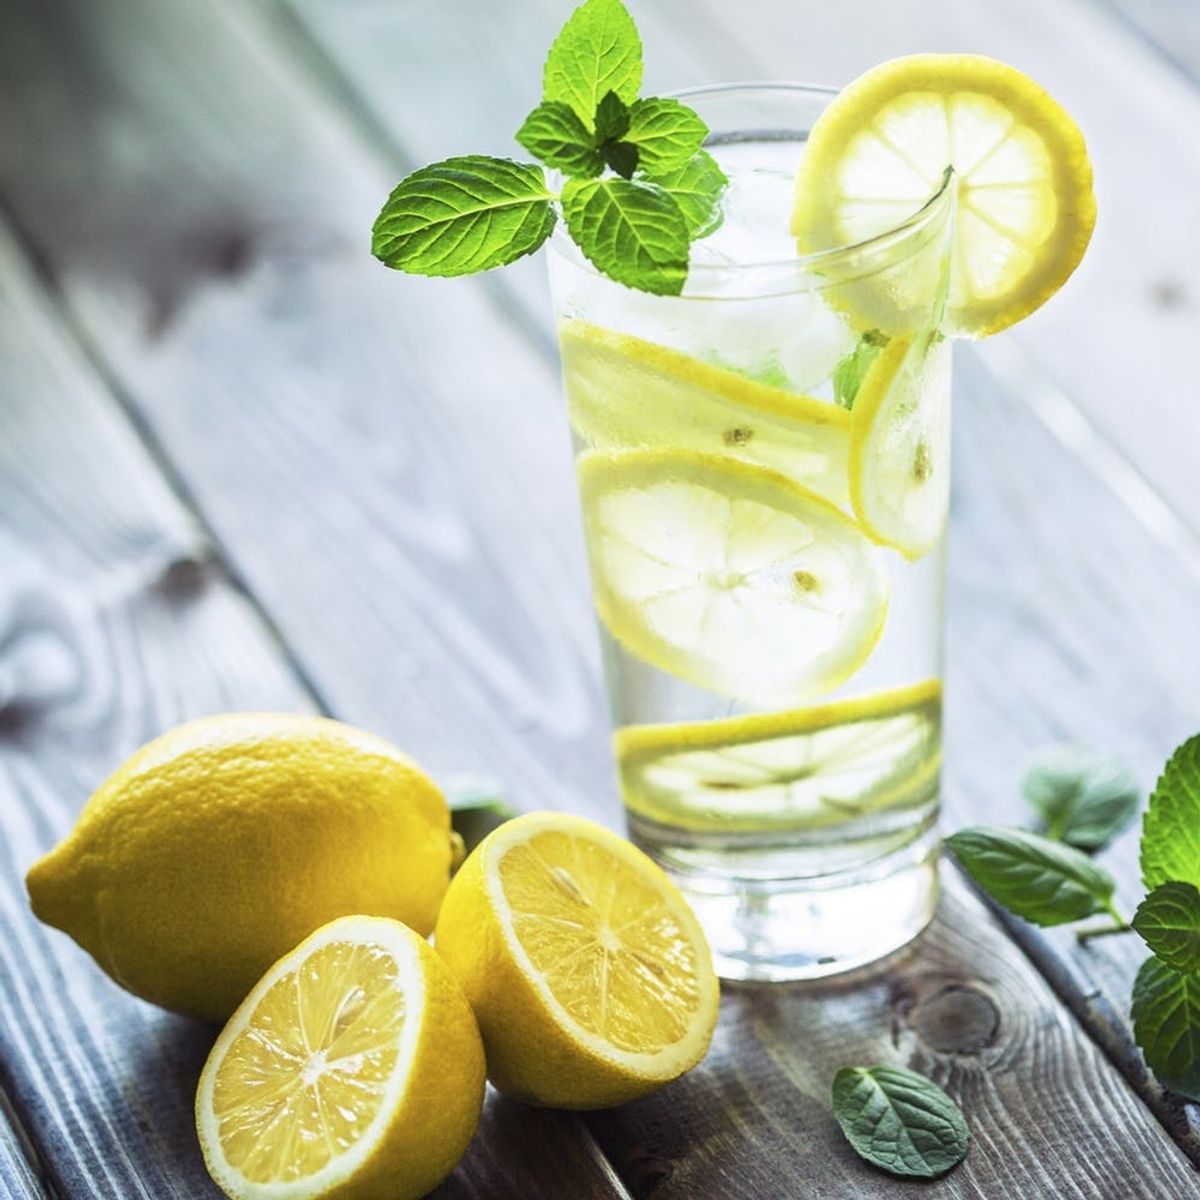 Here’s Why You Should Stop Putting Lemon in Your Drink